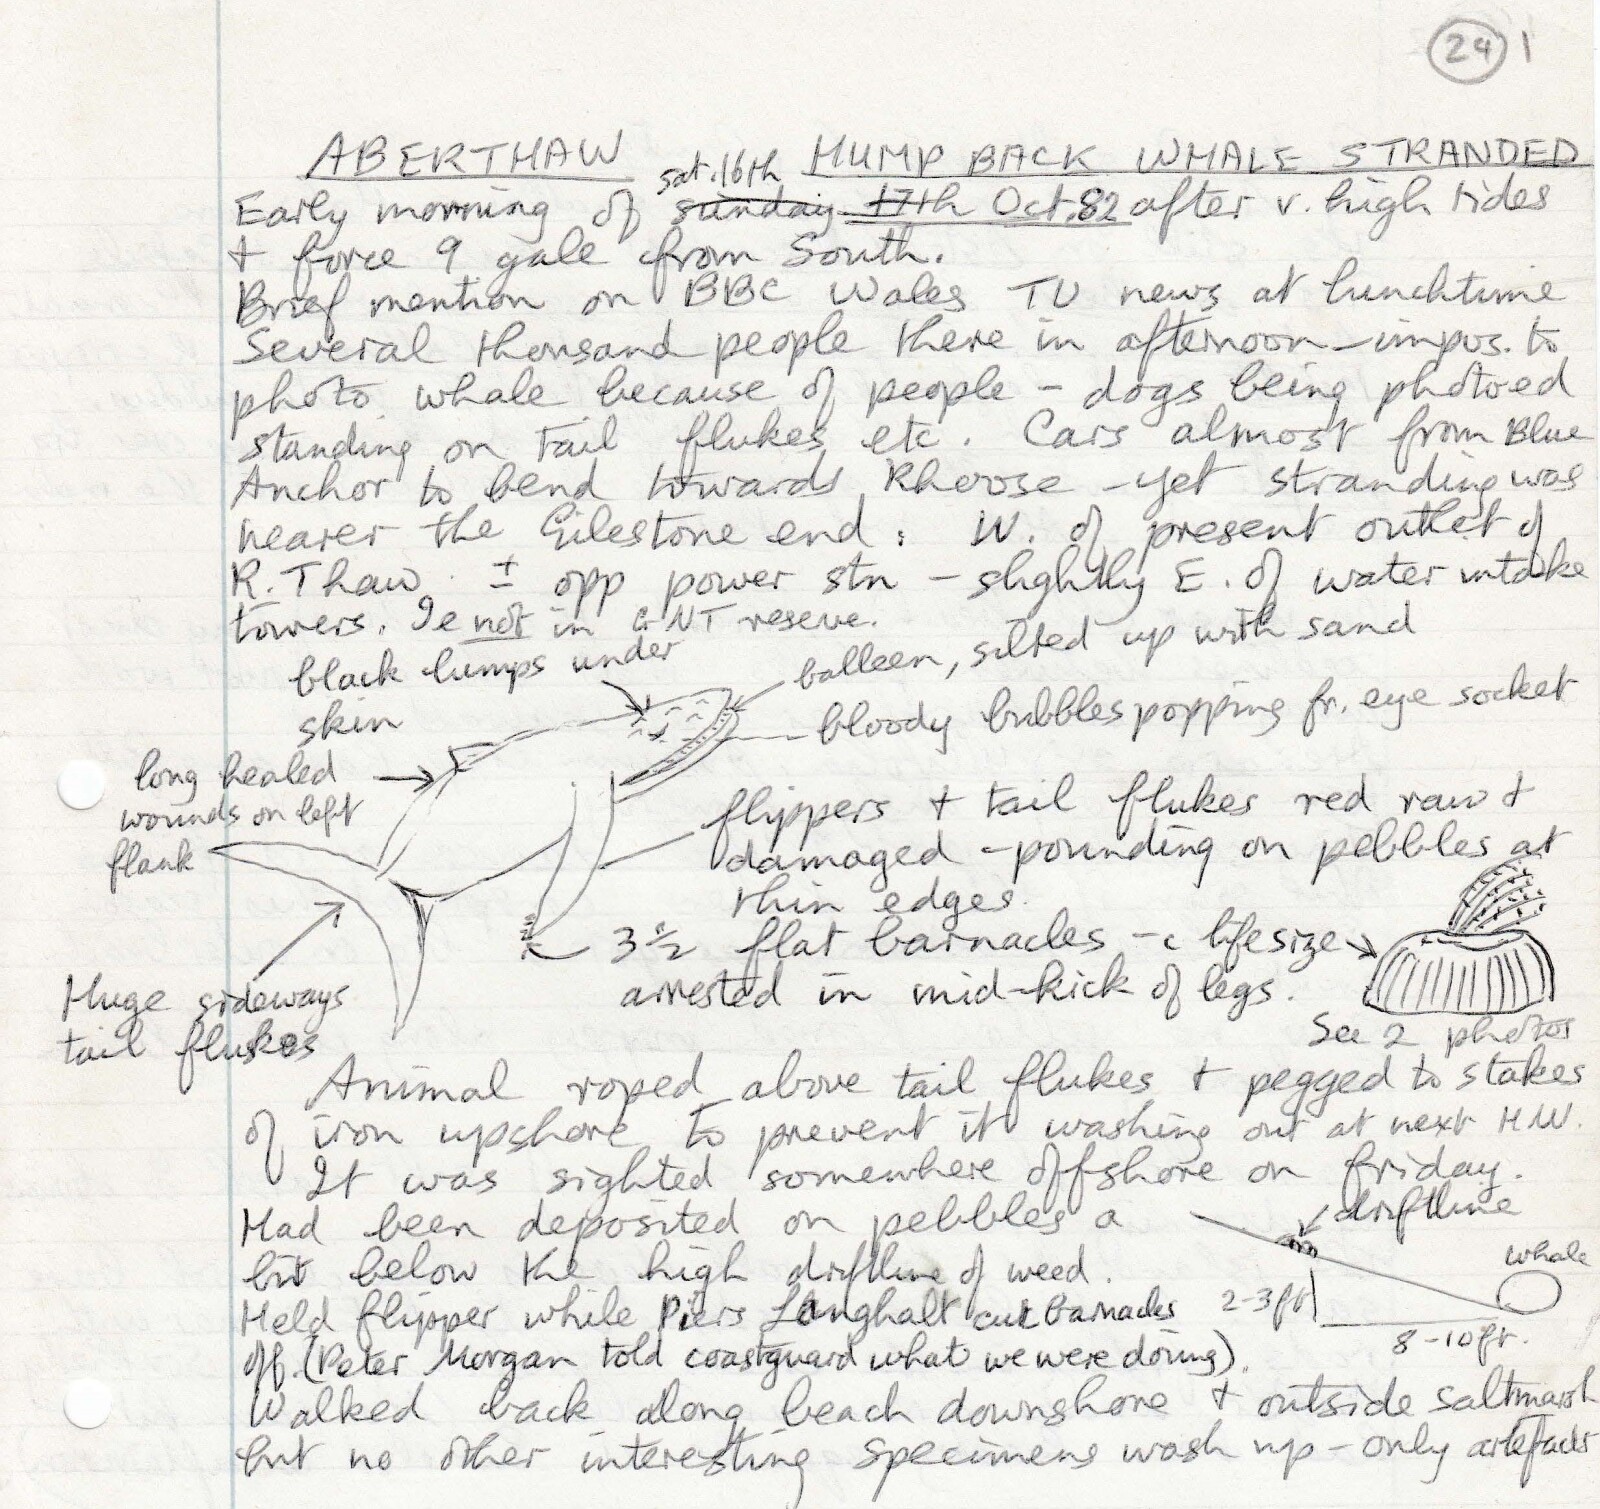 Notes about discovery of Humpback Whale stranded on Aberthaw beach in 1982, by Mary Gillham